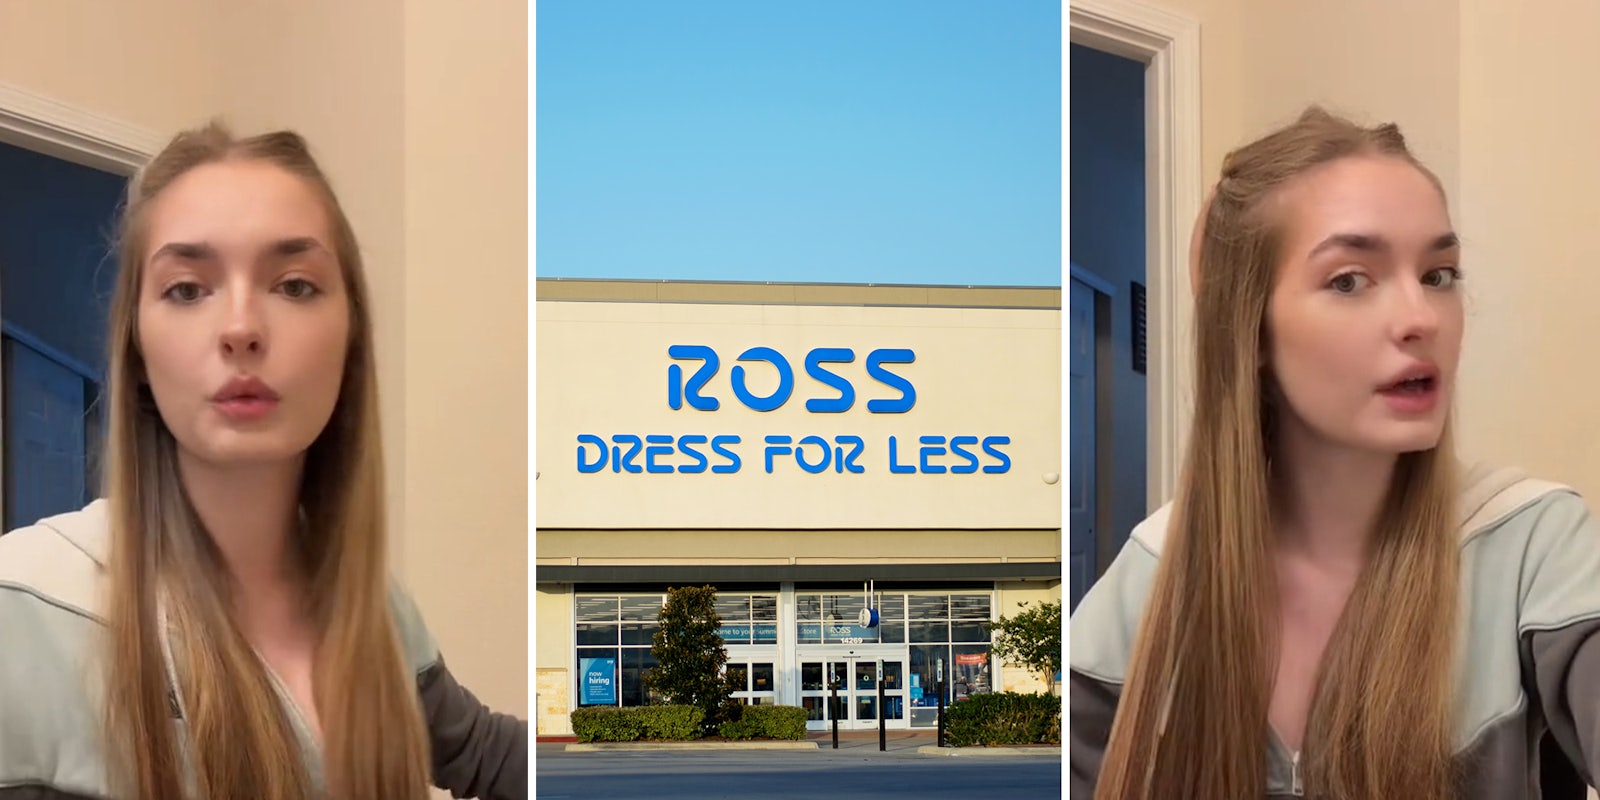 woman explaining rules that company Ross had during her shift; Ross Dress for Less Store Front